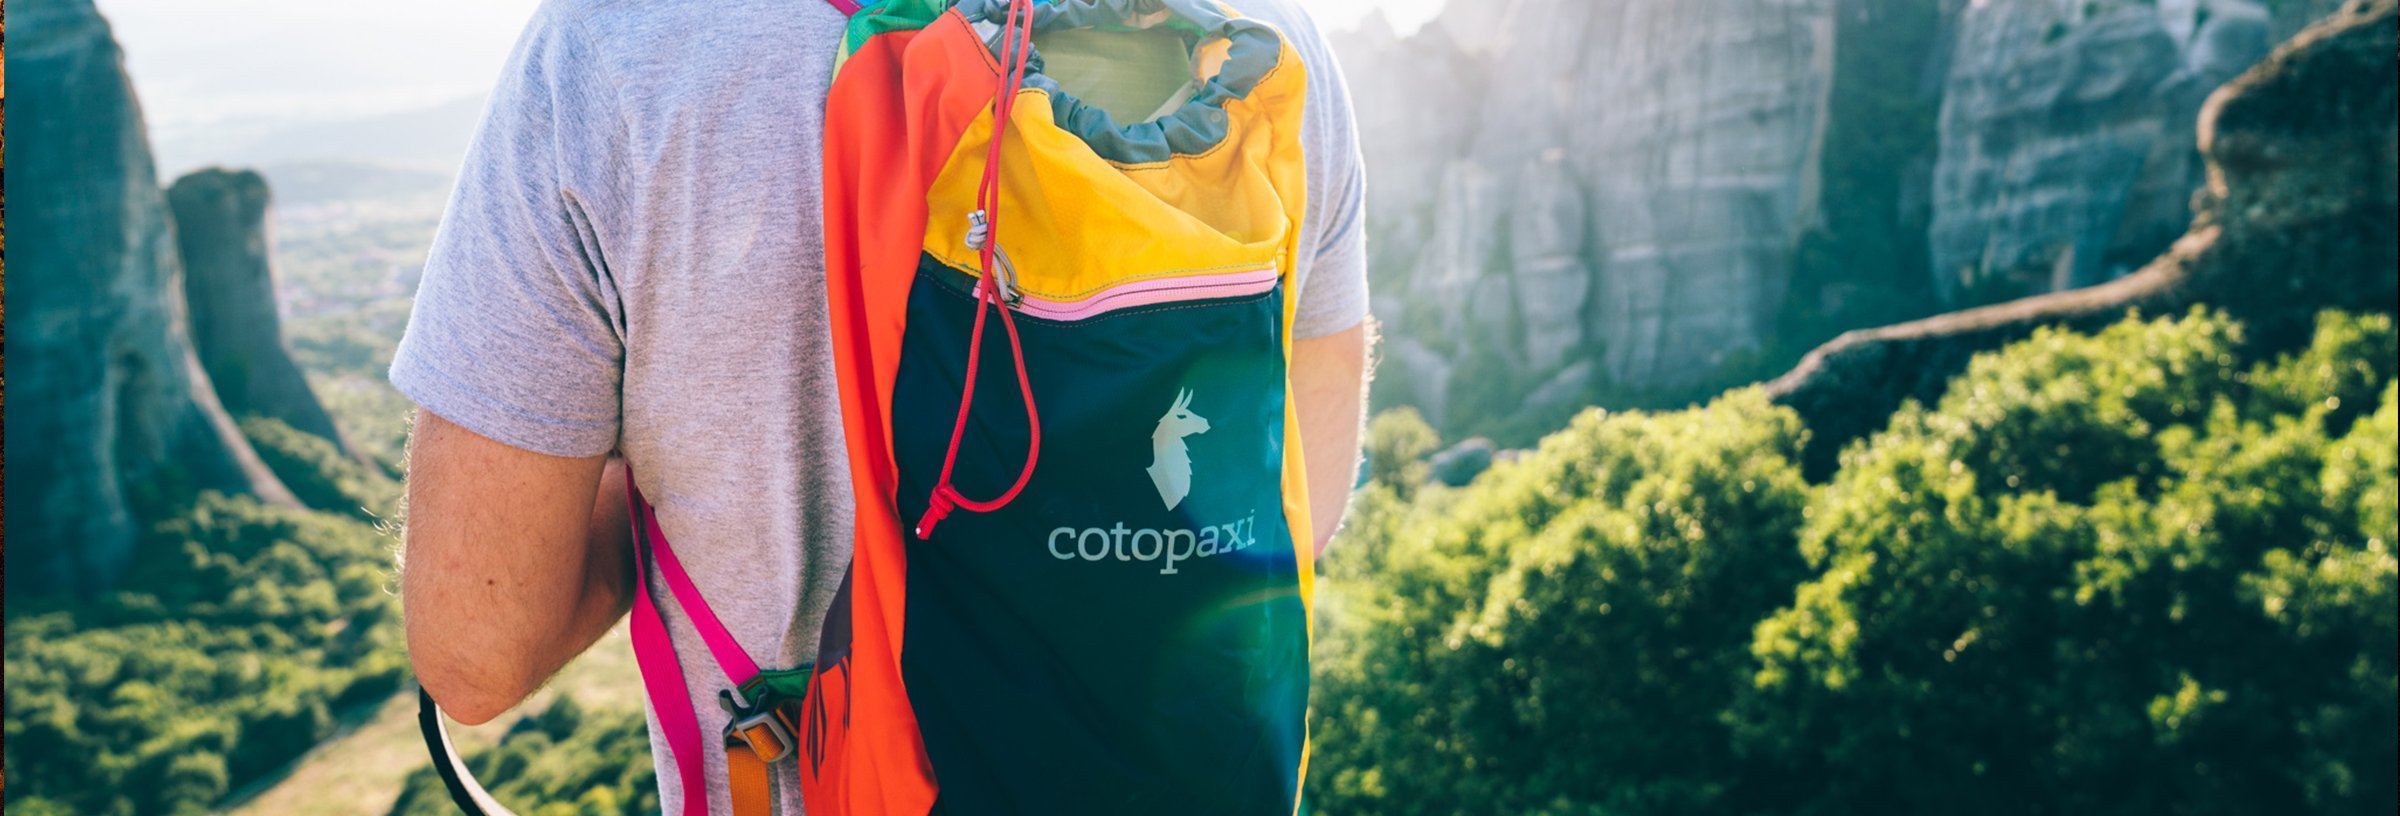 Enjoy The Outdoors With Unique Cotopaxi Gear - foxhallgallery